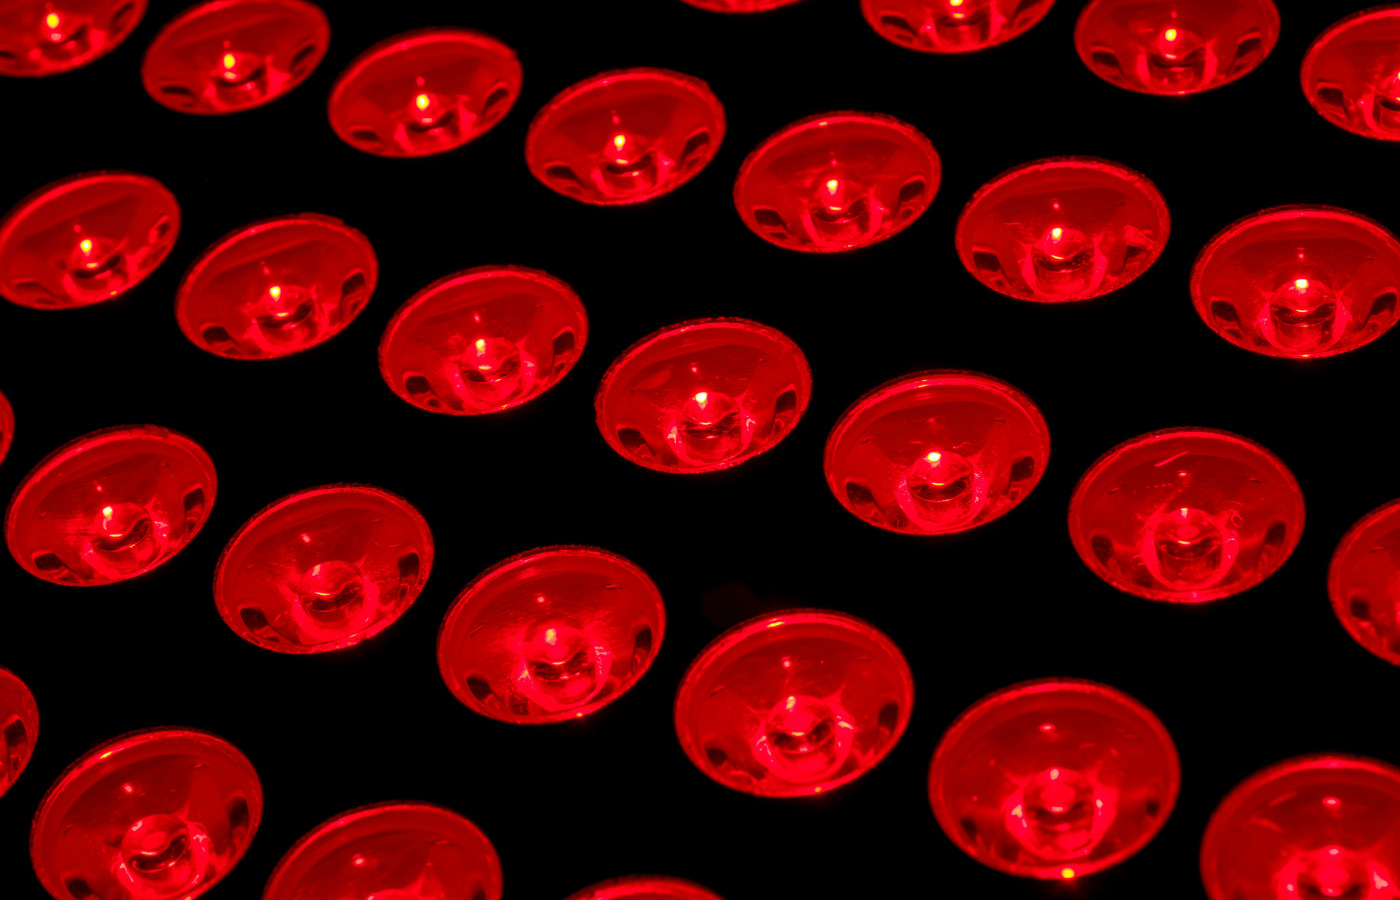 image of multiple red light therapy bulbs in a pattern